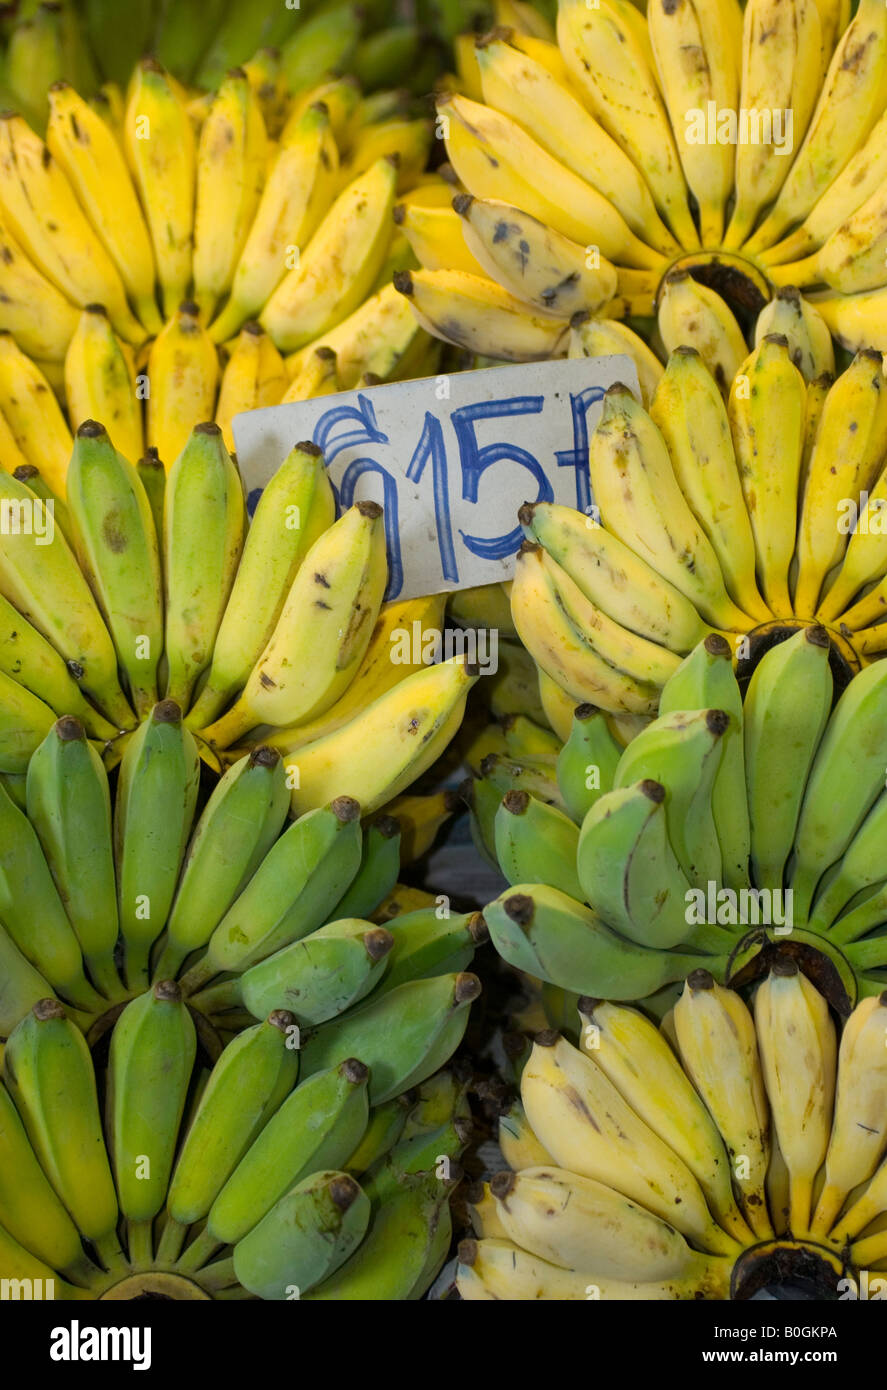 Bananas on sale at the local wet market Stock Photo